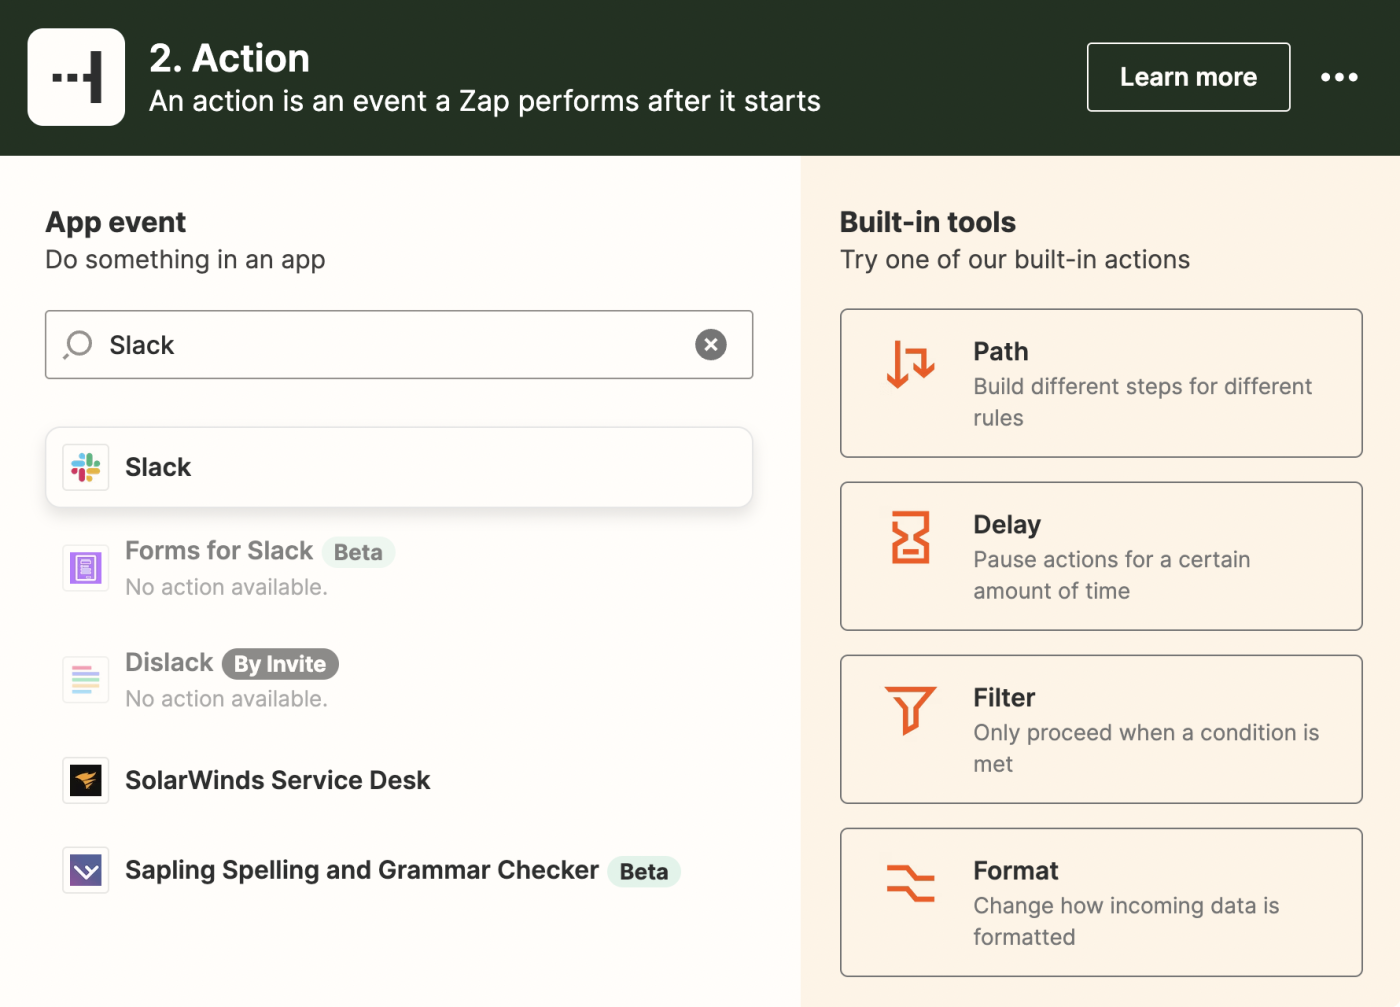 Slack being selected as the action event in Zapier.